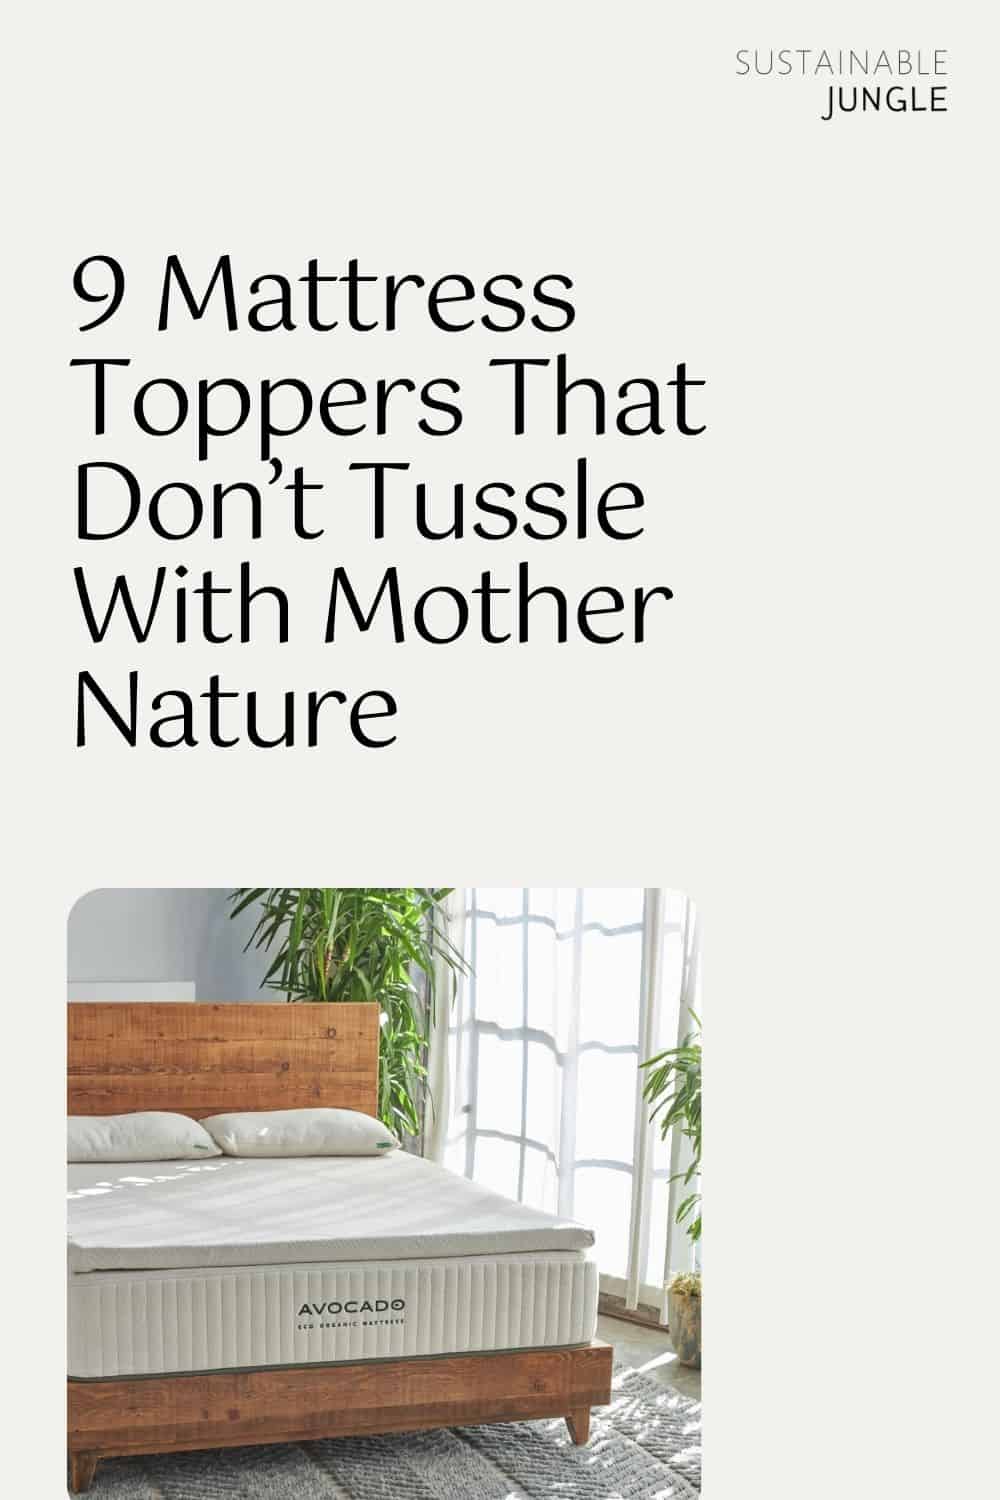 9 Mattress Toppers That Don’t Tussle With Mother Nature Image by Avocado #organicmattrestopper #bestorganicmattresstopers #organiclatexmattresstoppers #organicwoolmattresstopper#nontoxicmattresstoppers #organicnnontoxicmattresstoppers #sustainablejungle